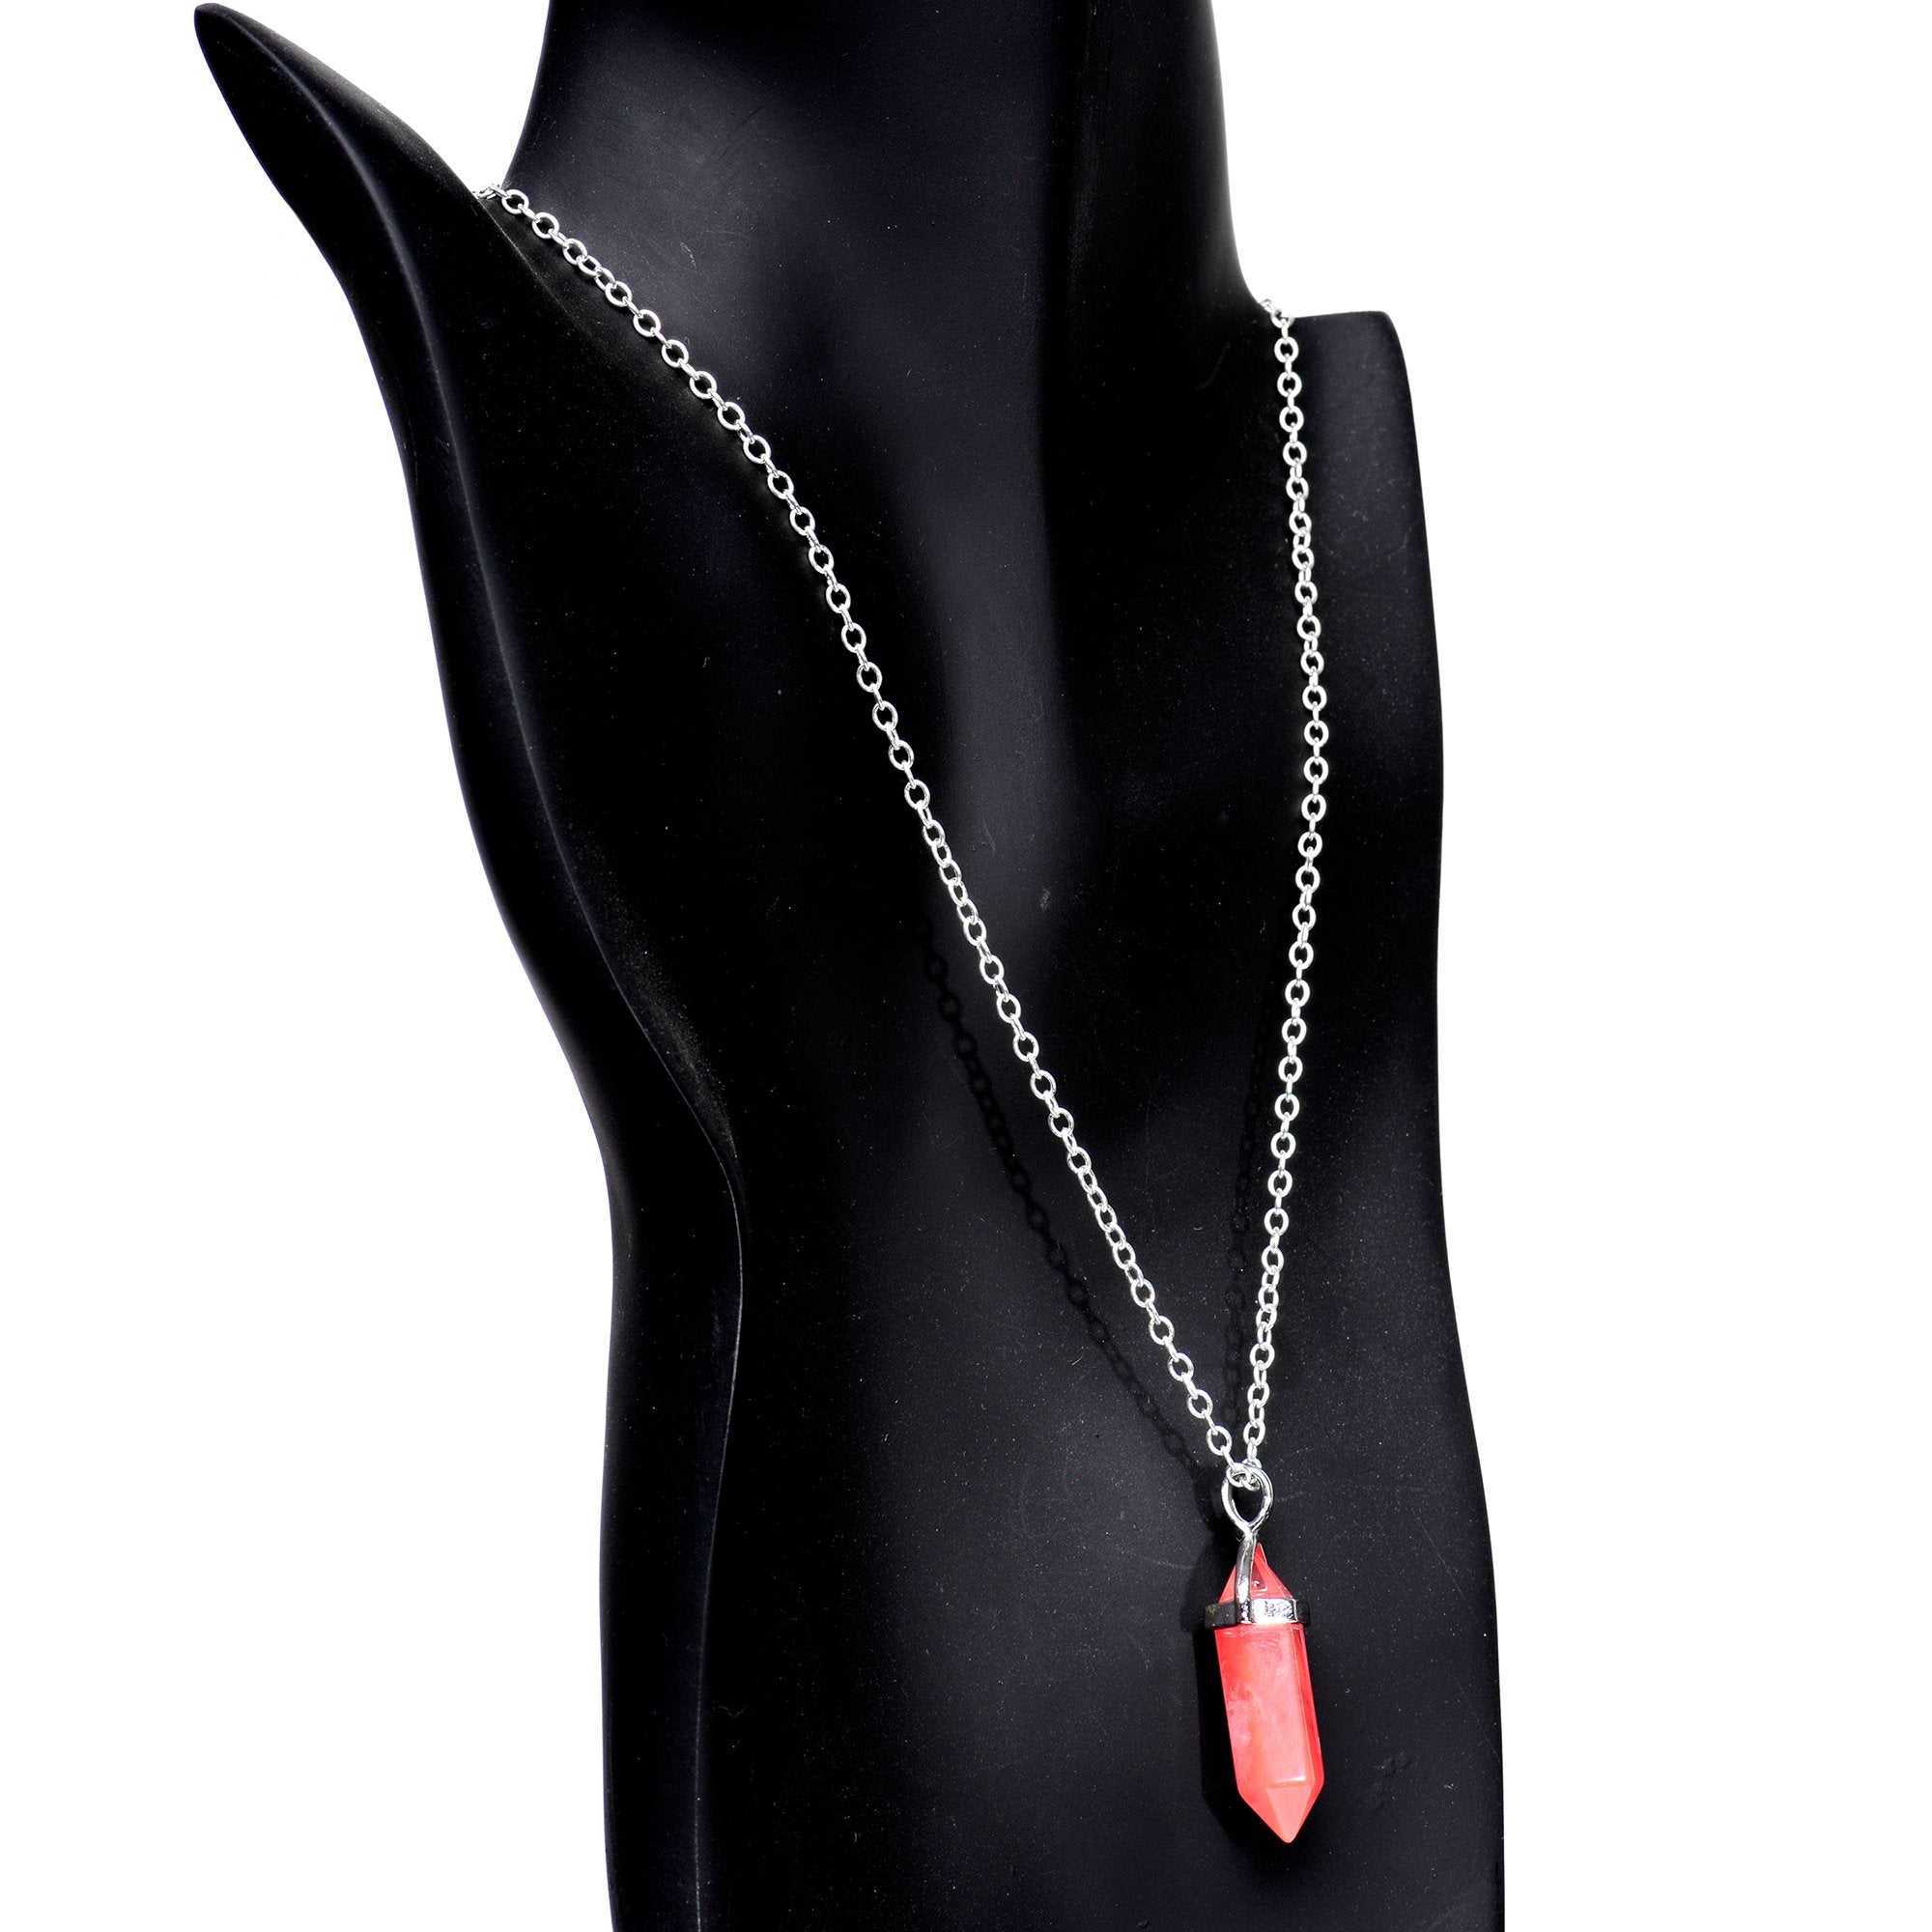 Handcrafted Pink Quartz Prism Silver Plated Chain Necklace